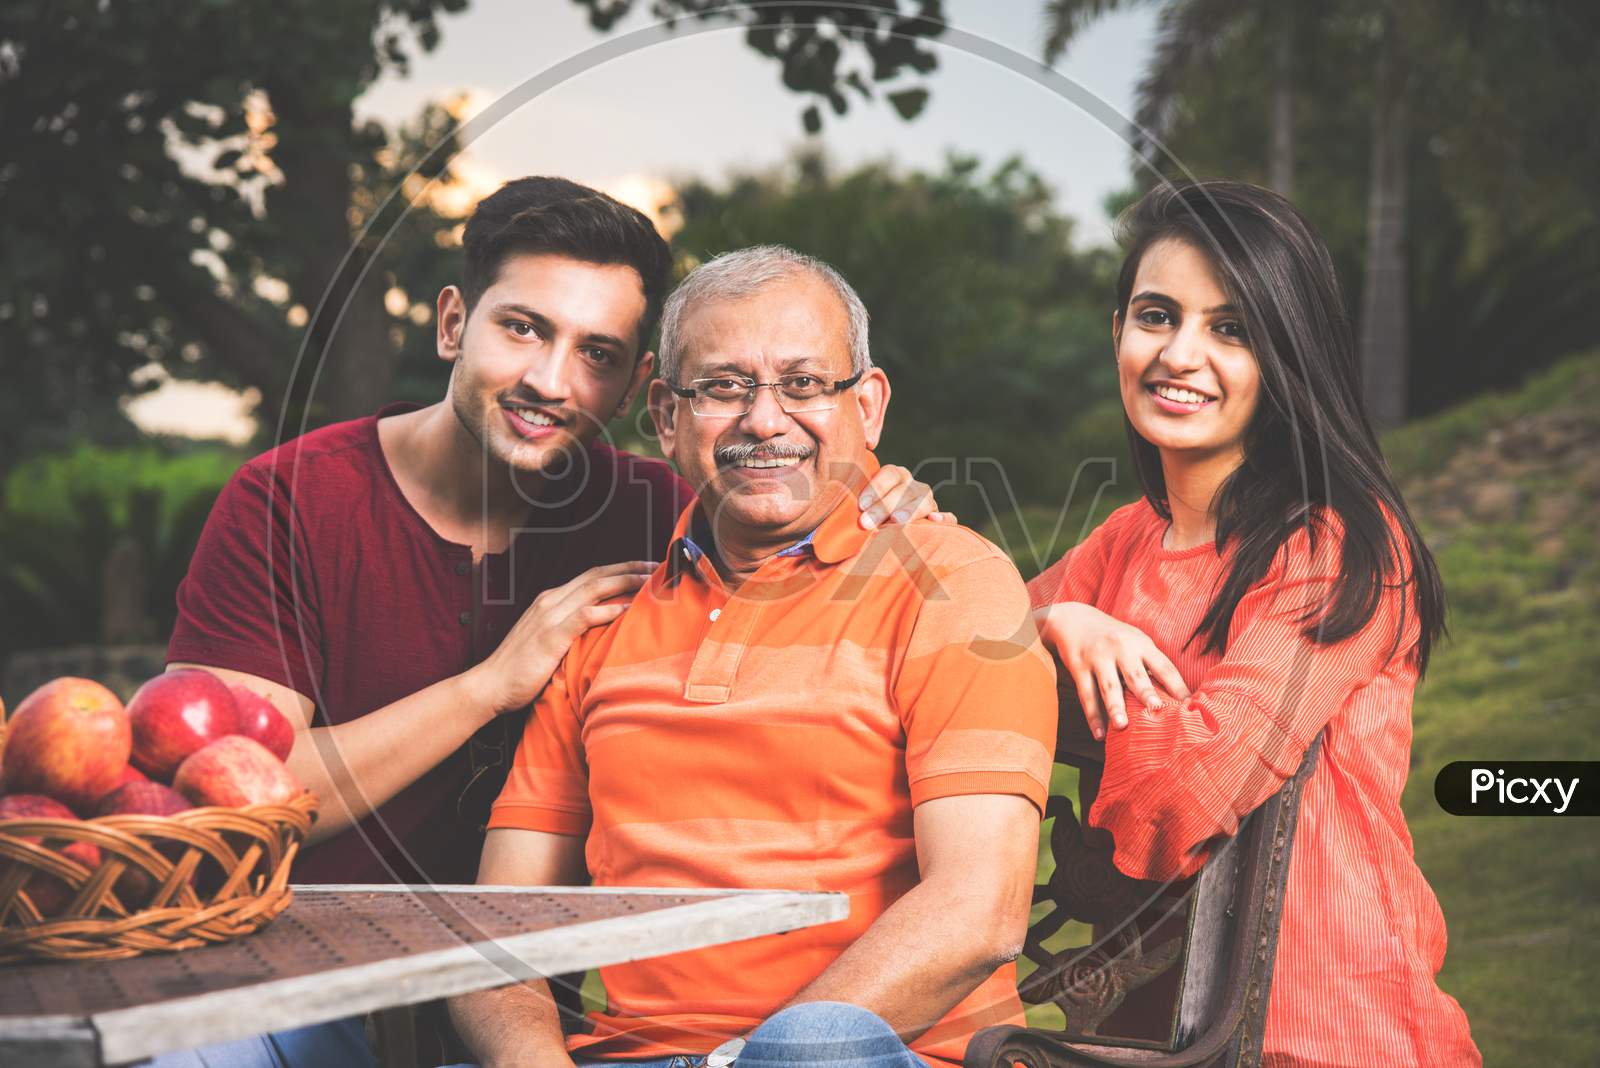 Portrait of Happy Indian/Asian Family while sitting on Lawn chair, outdoor